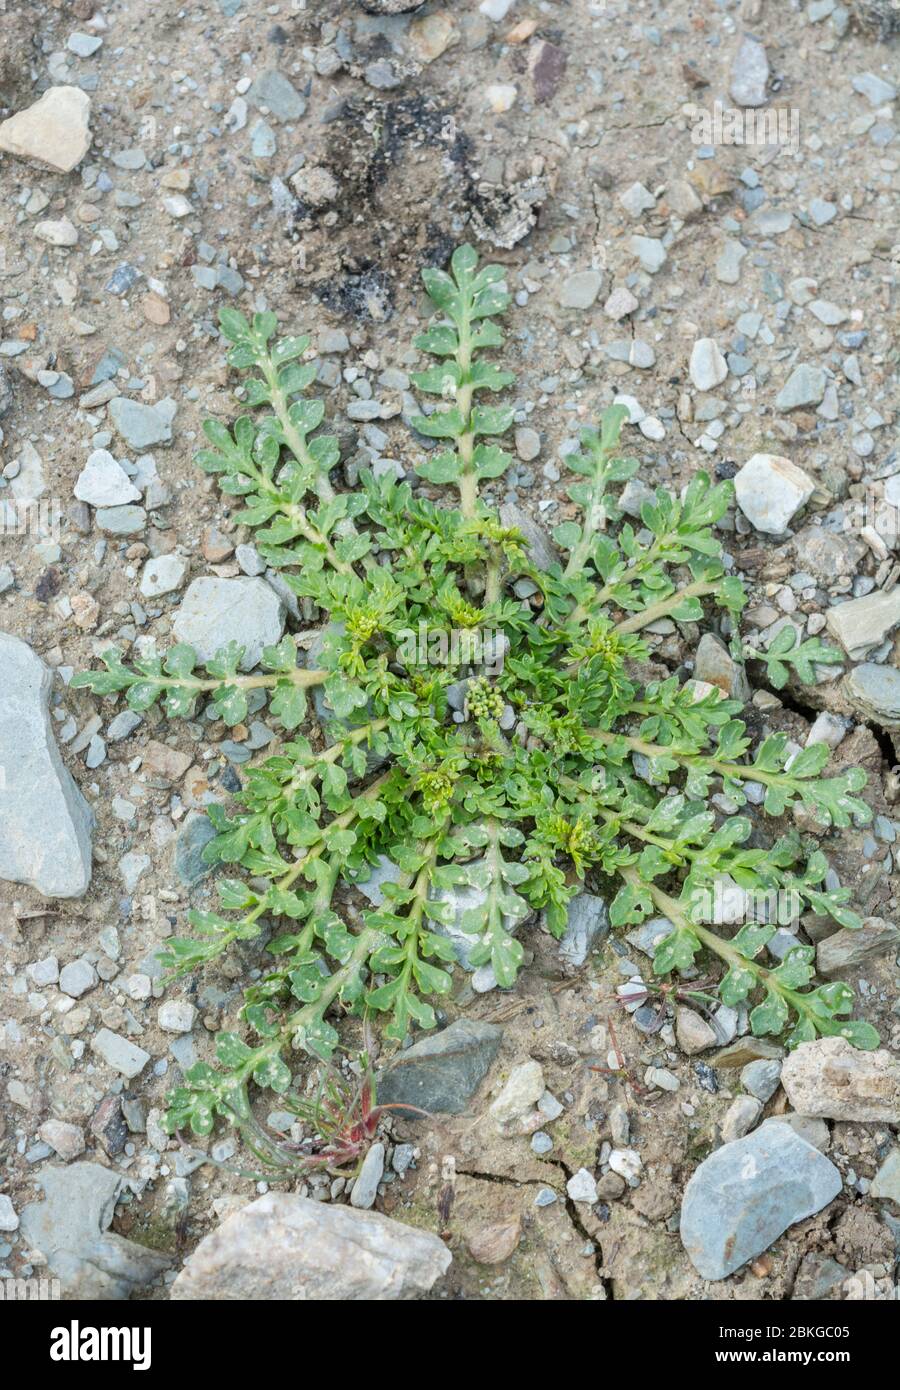 Possibly leaf rosette of a young Shepherds Purse / Capsella bursa-pastoris plant in a parched cropped field. Once used medicinally, and also edible Stock Photo